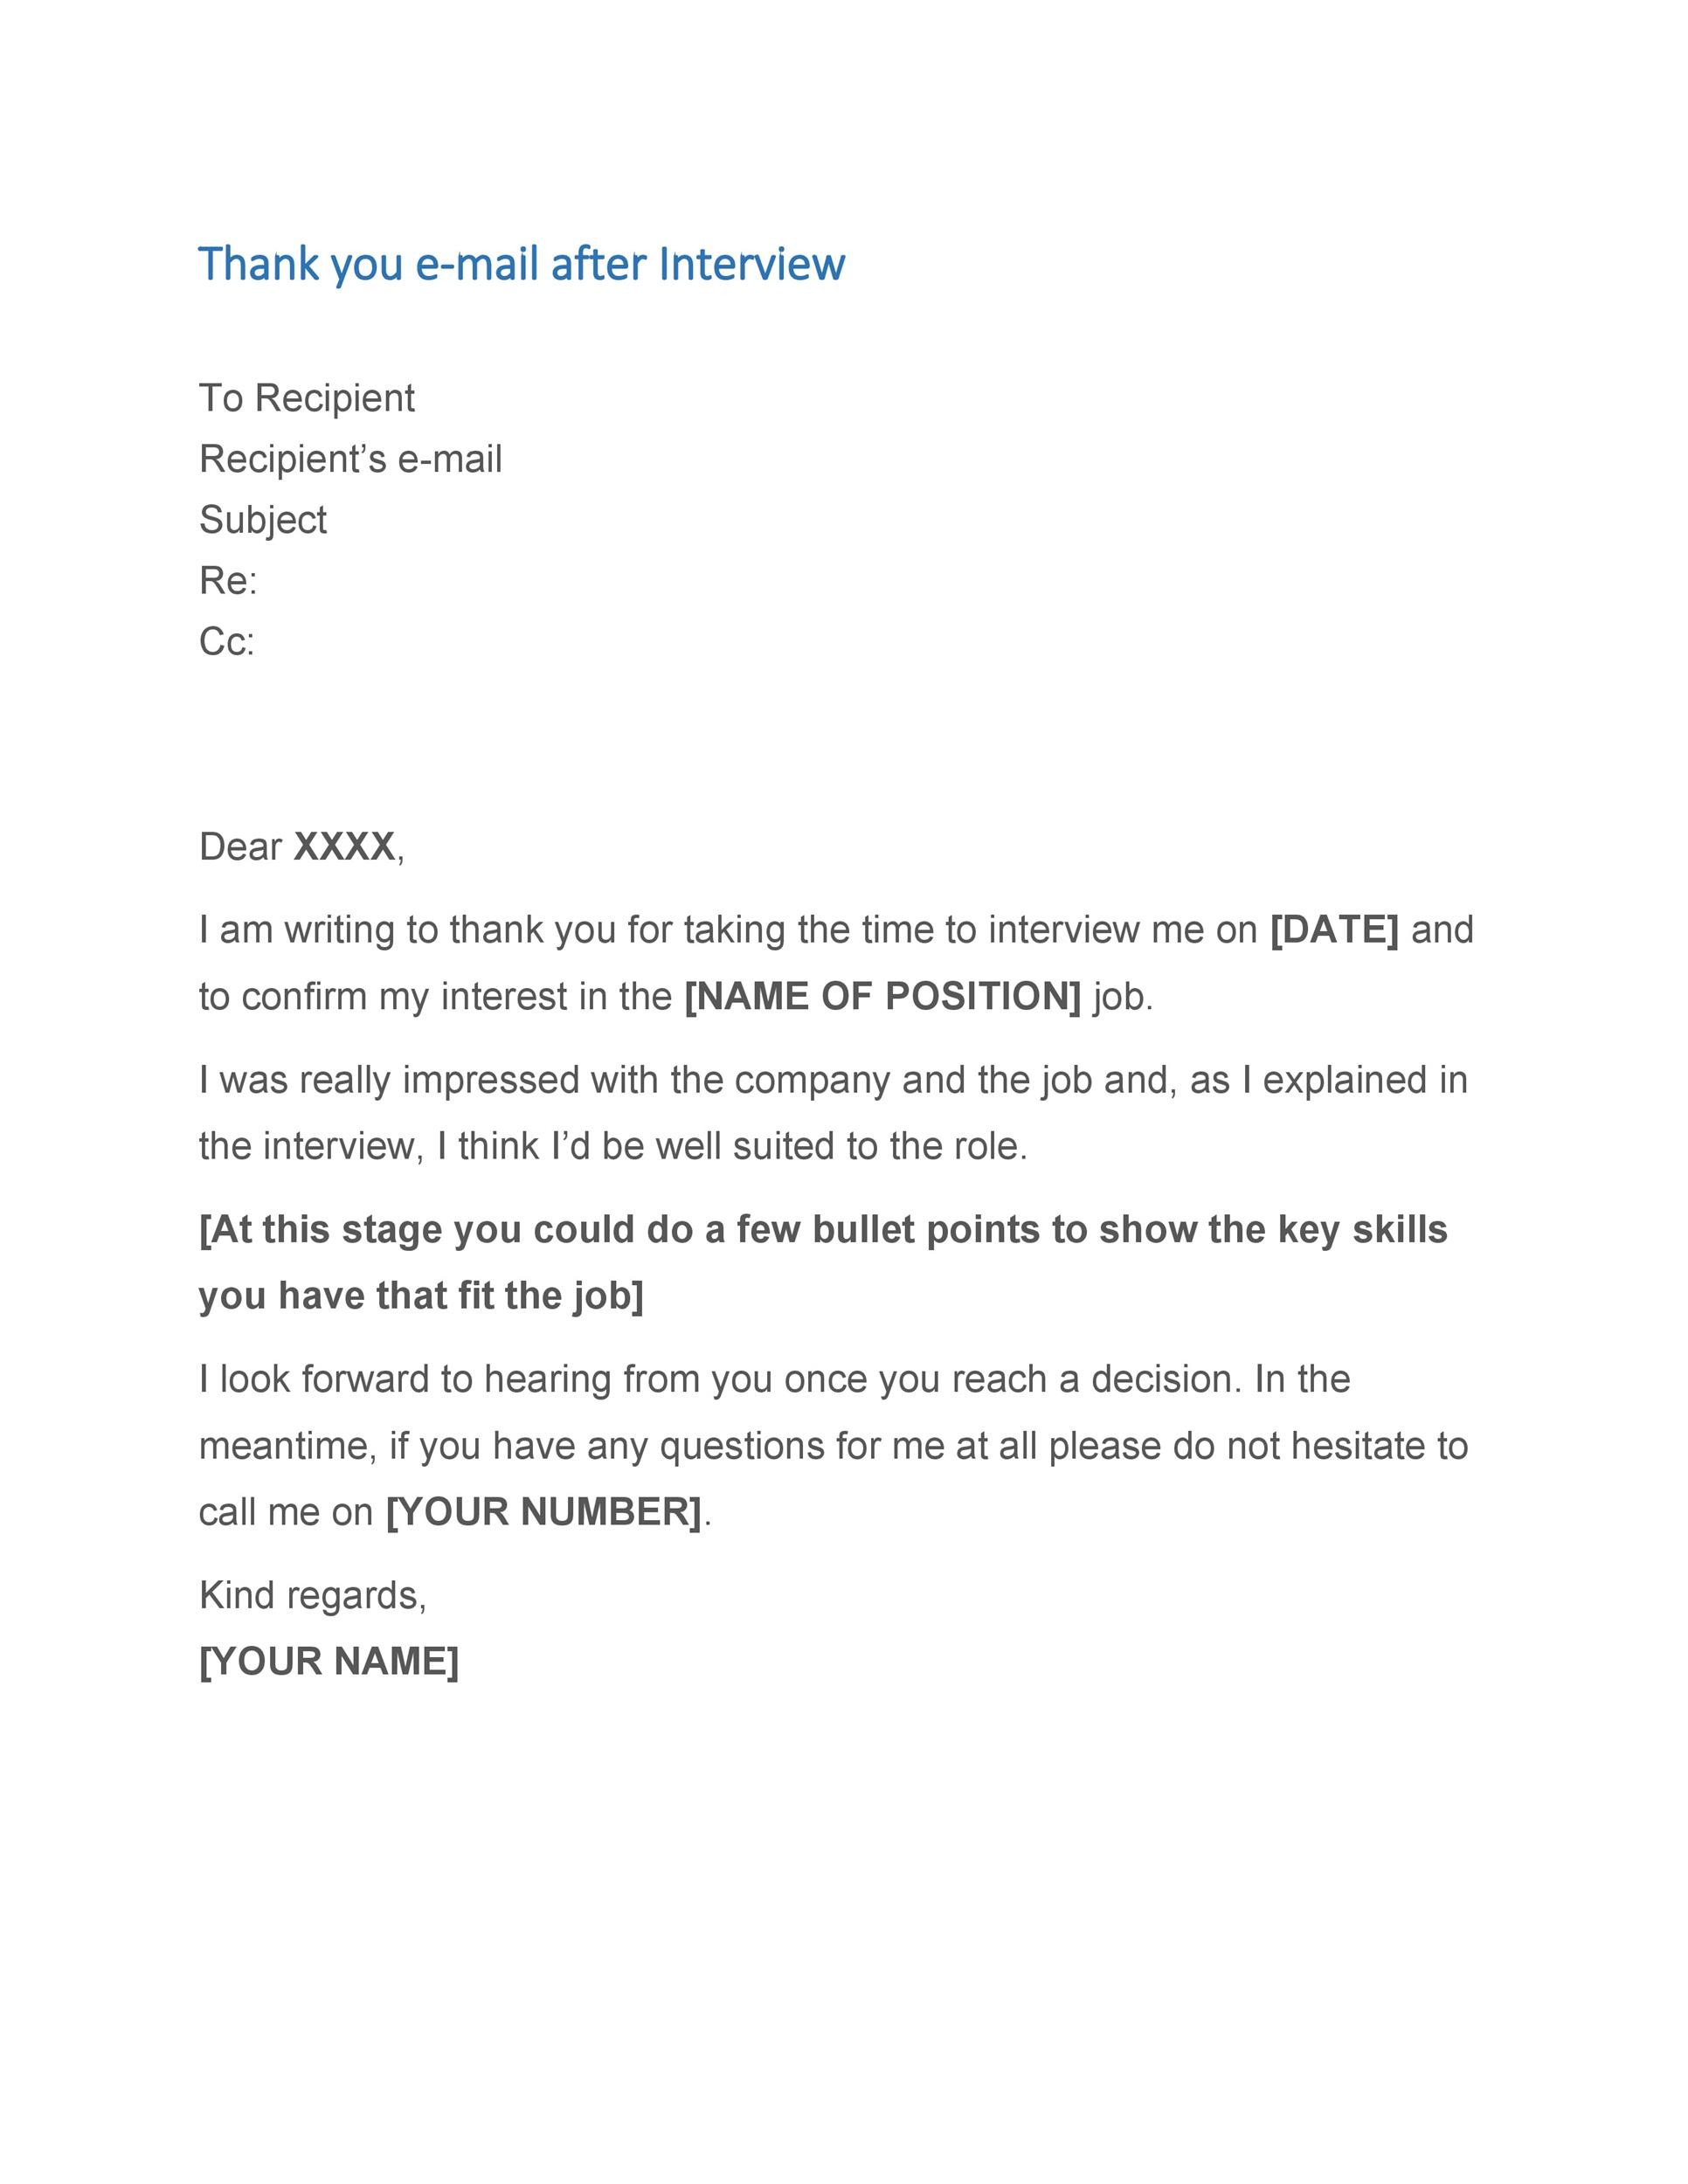 Free Thank you e-mail after Interview Template 37